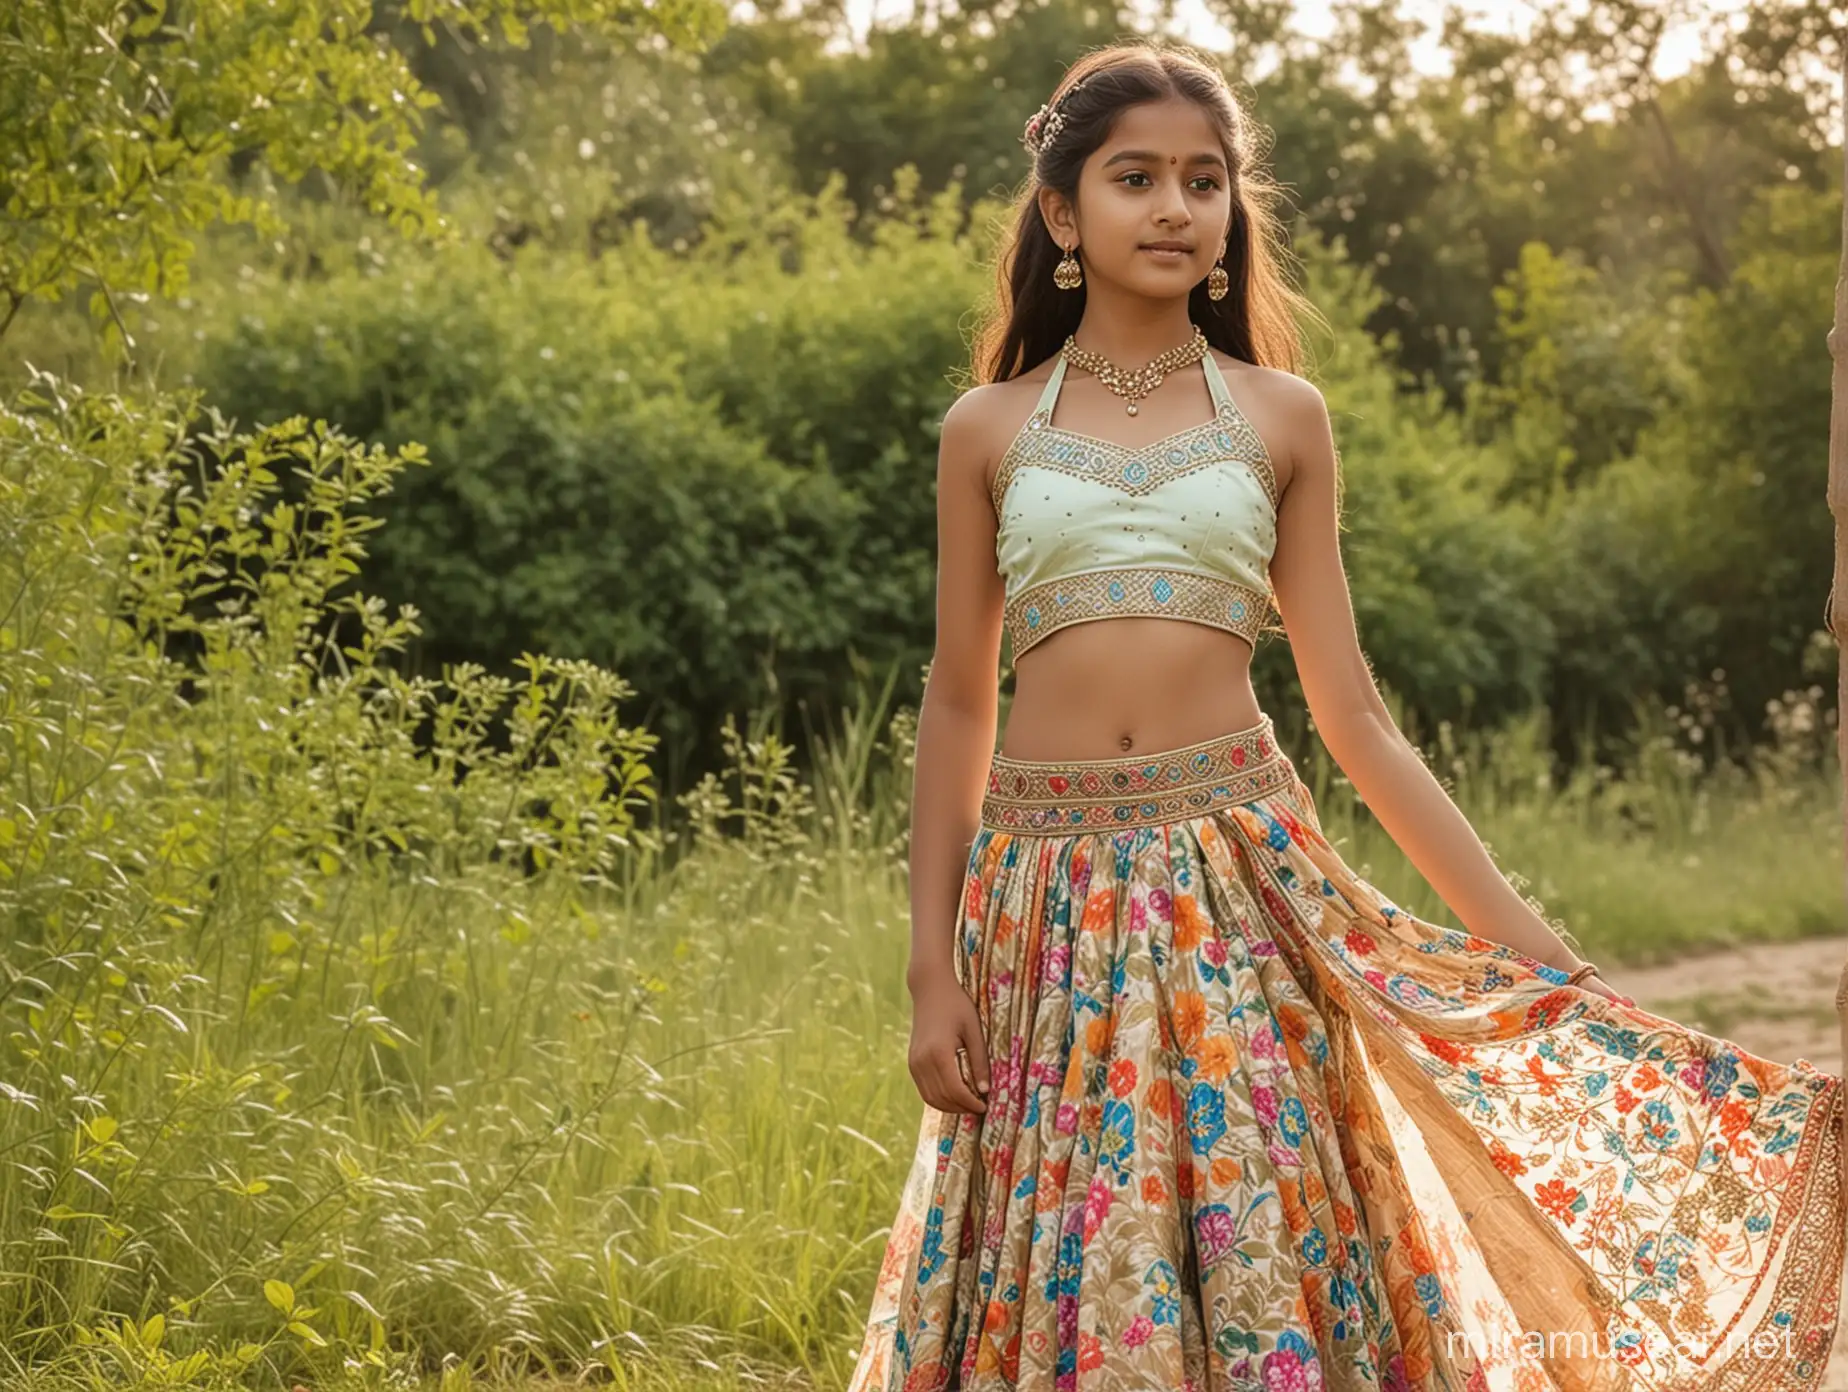 12 years old girl, fair in colour, wearing halter neck choli with lehenga, in nature